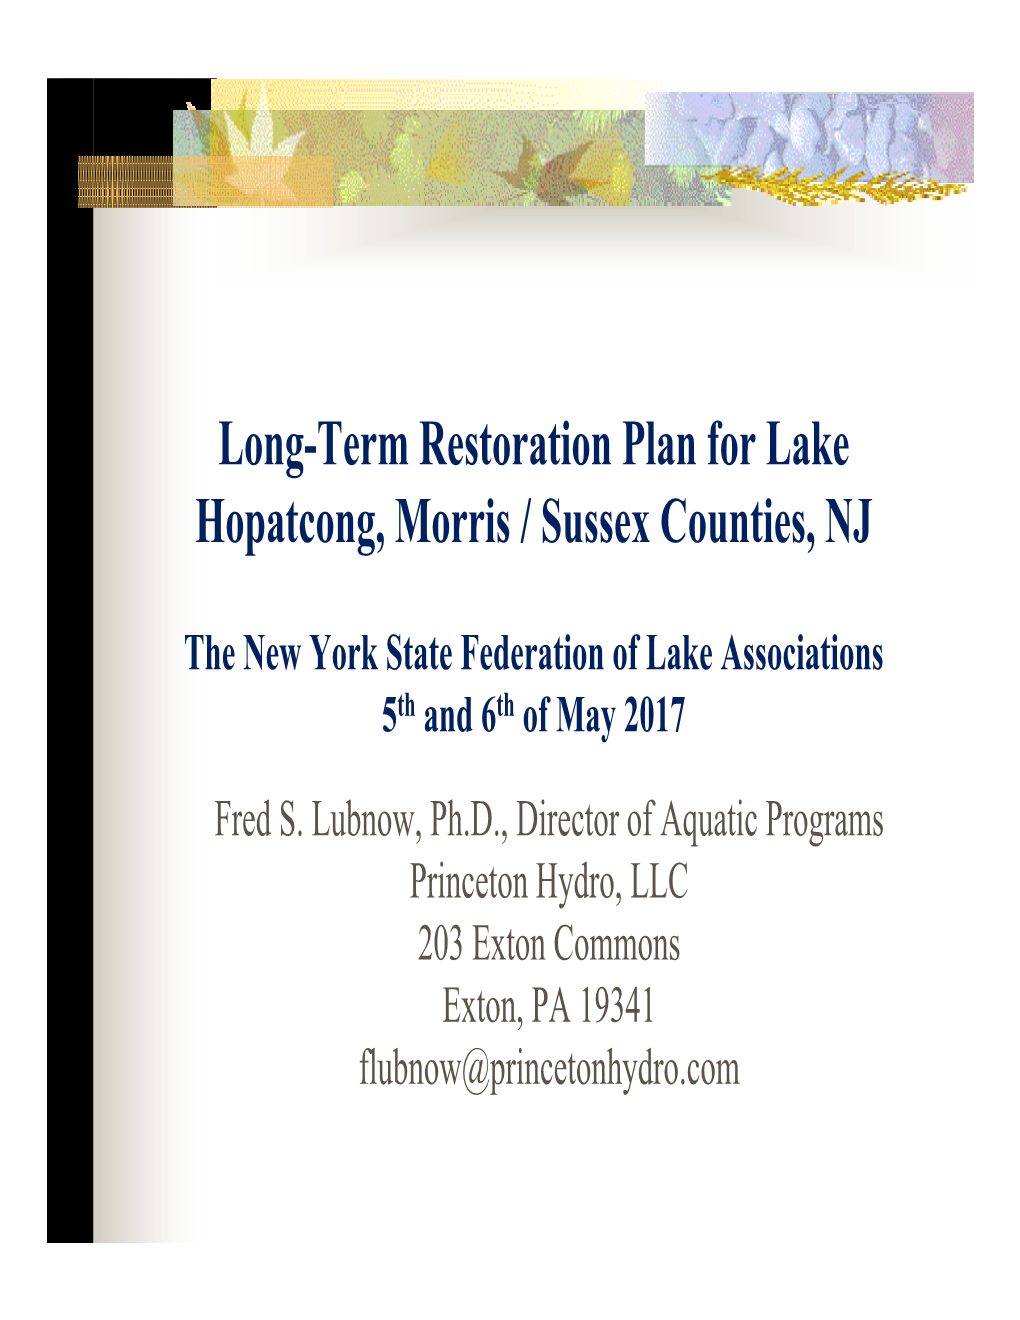 Long-Term Restoration Plan for Lake Hopatcong, Morris / Sussex Counties, NJ